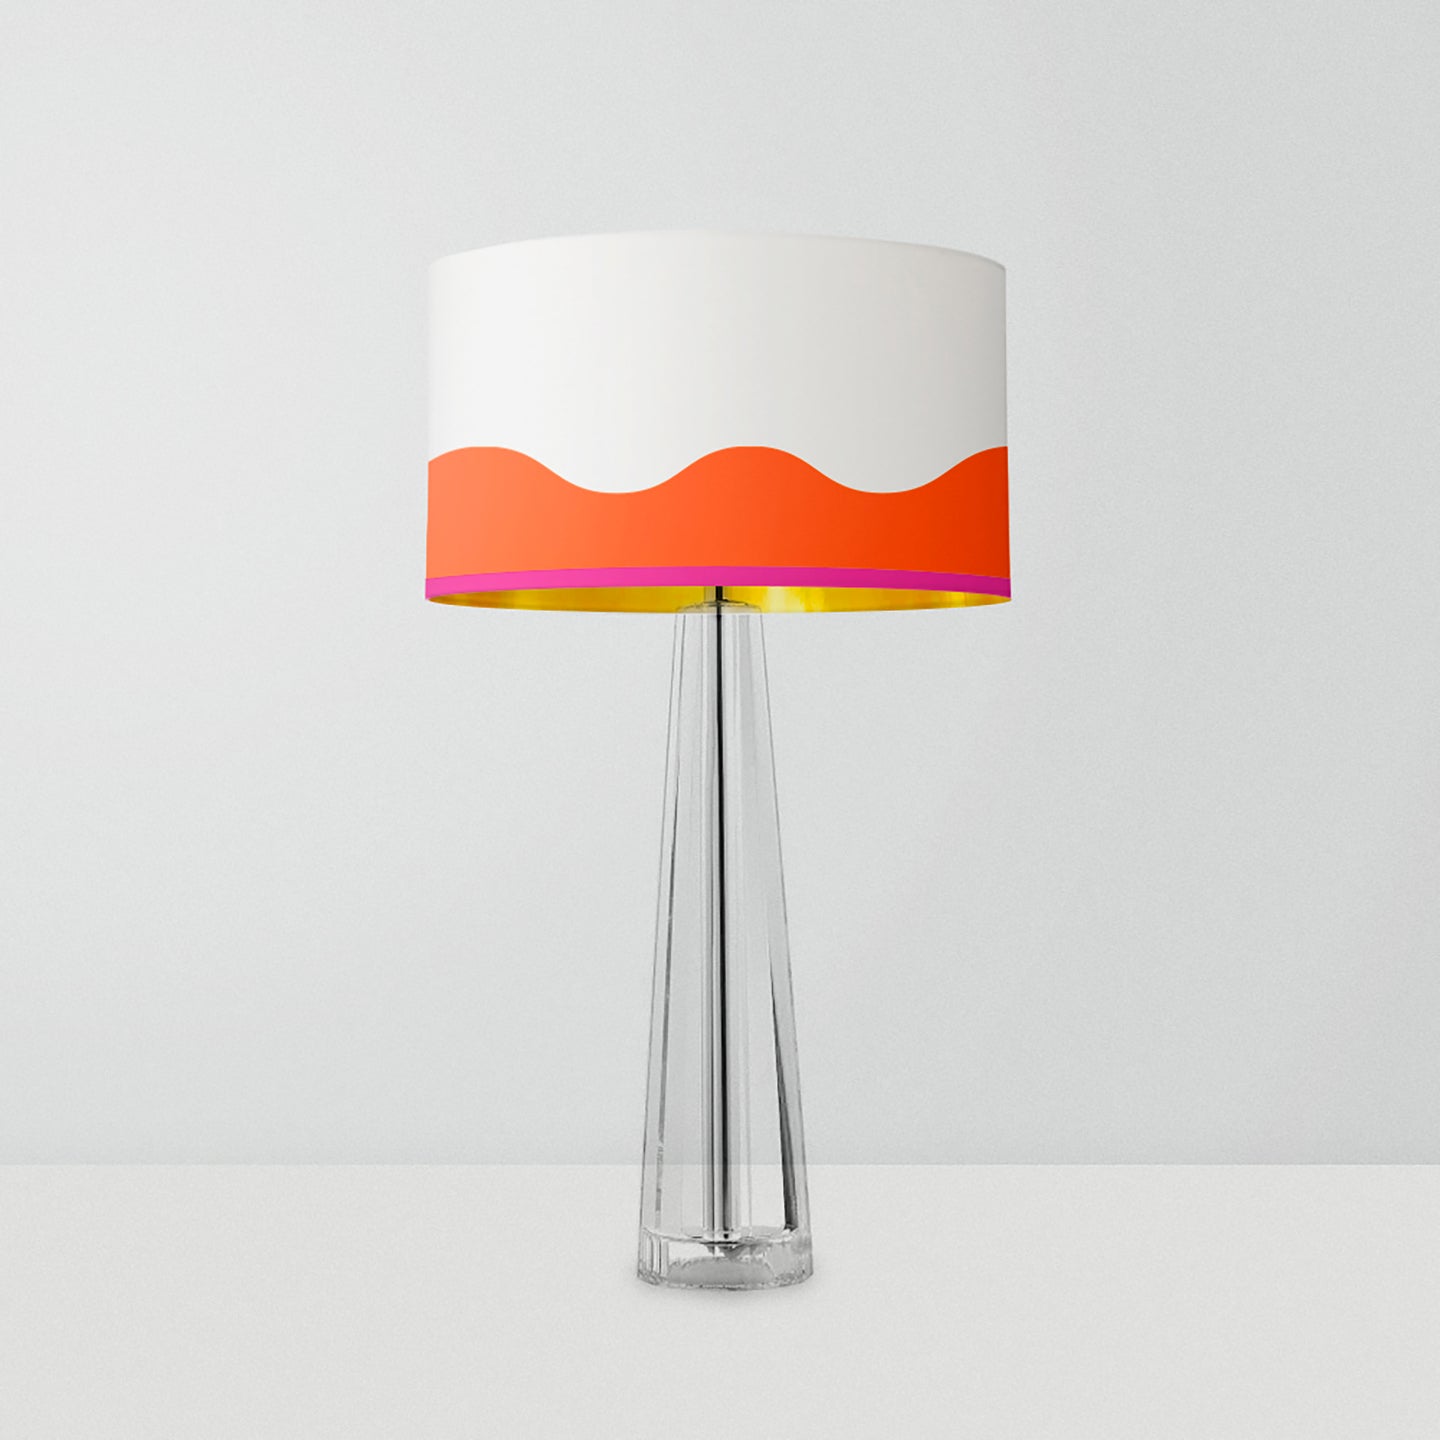 This lampshade is a fusion of modern artistry and functional lighting, promising to enliven any room it graces.